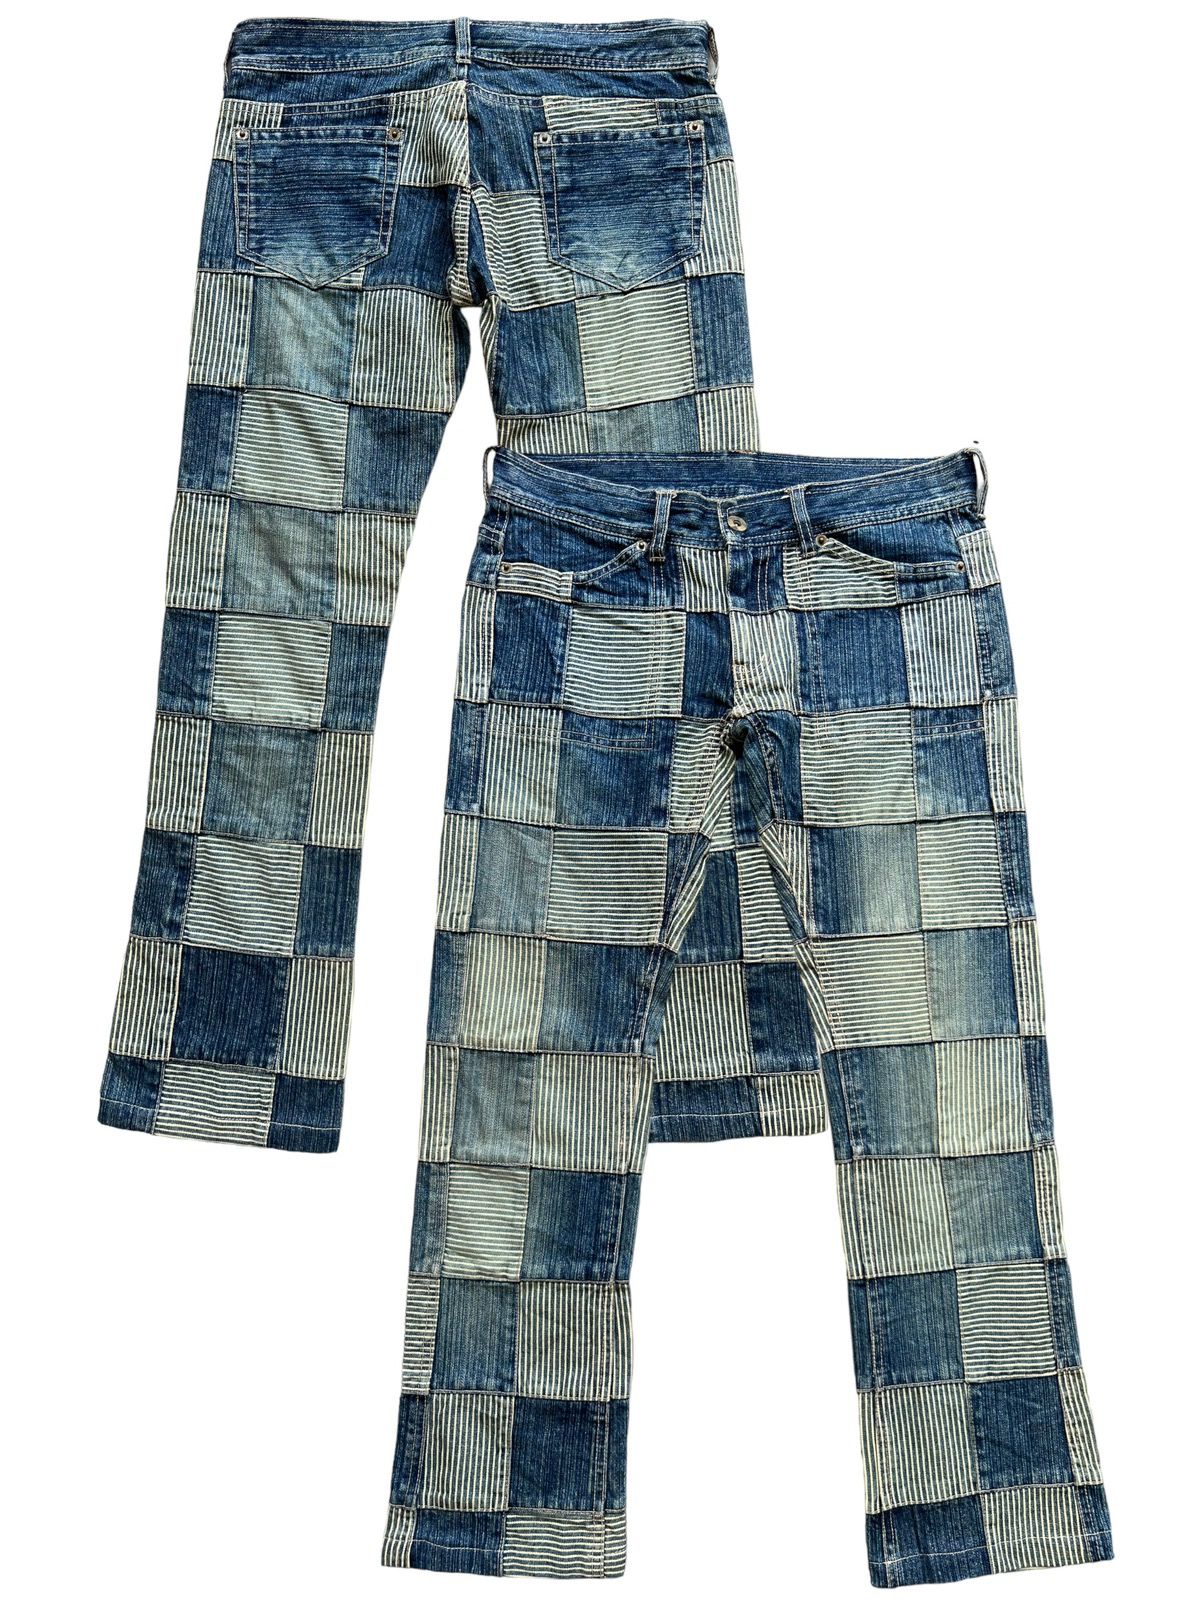 Japanese Brand Inspired by Kapital Patchwork Jeans 31x28.5 - 1